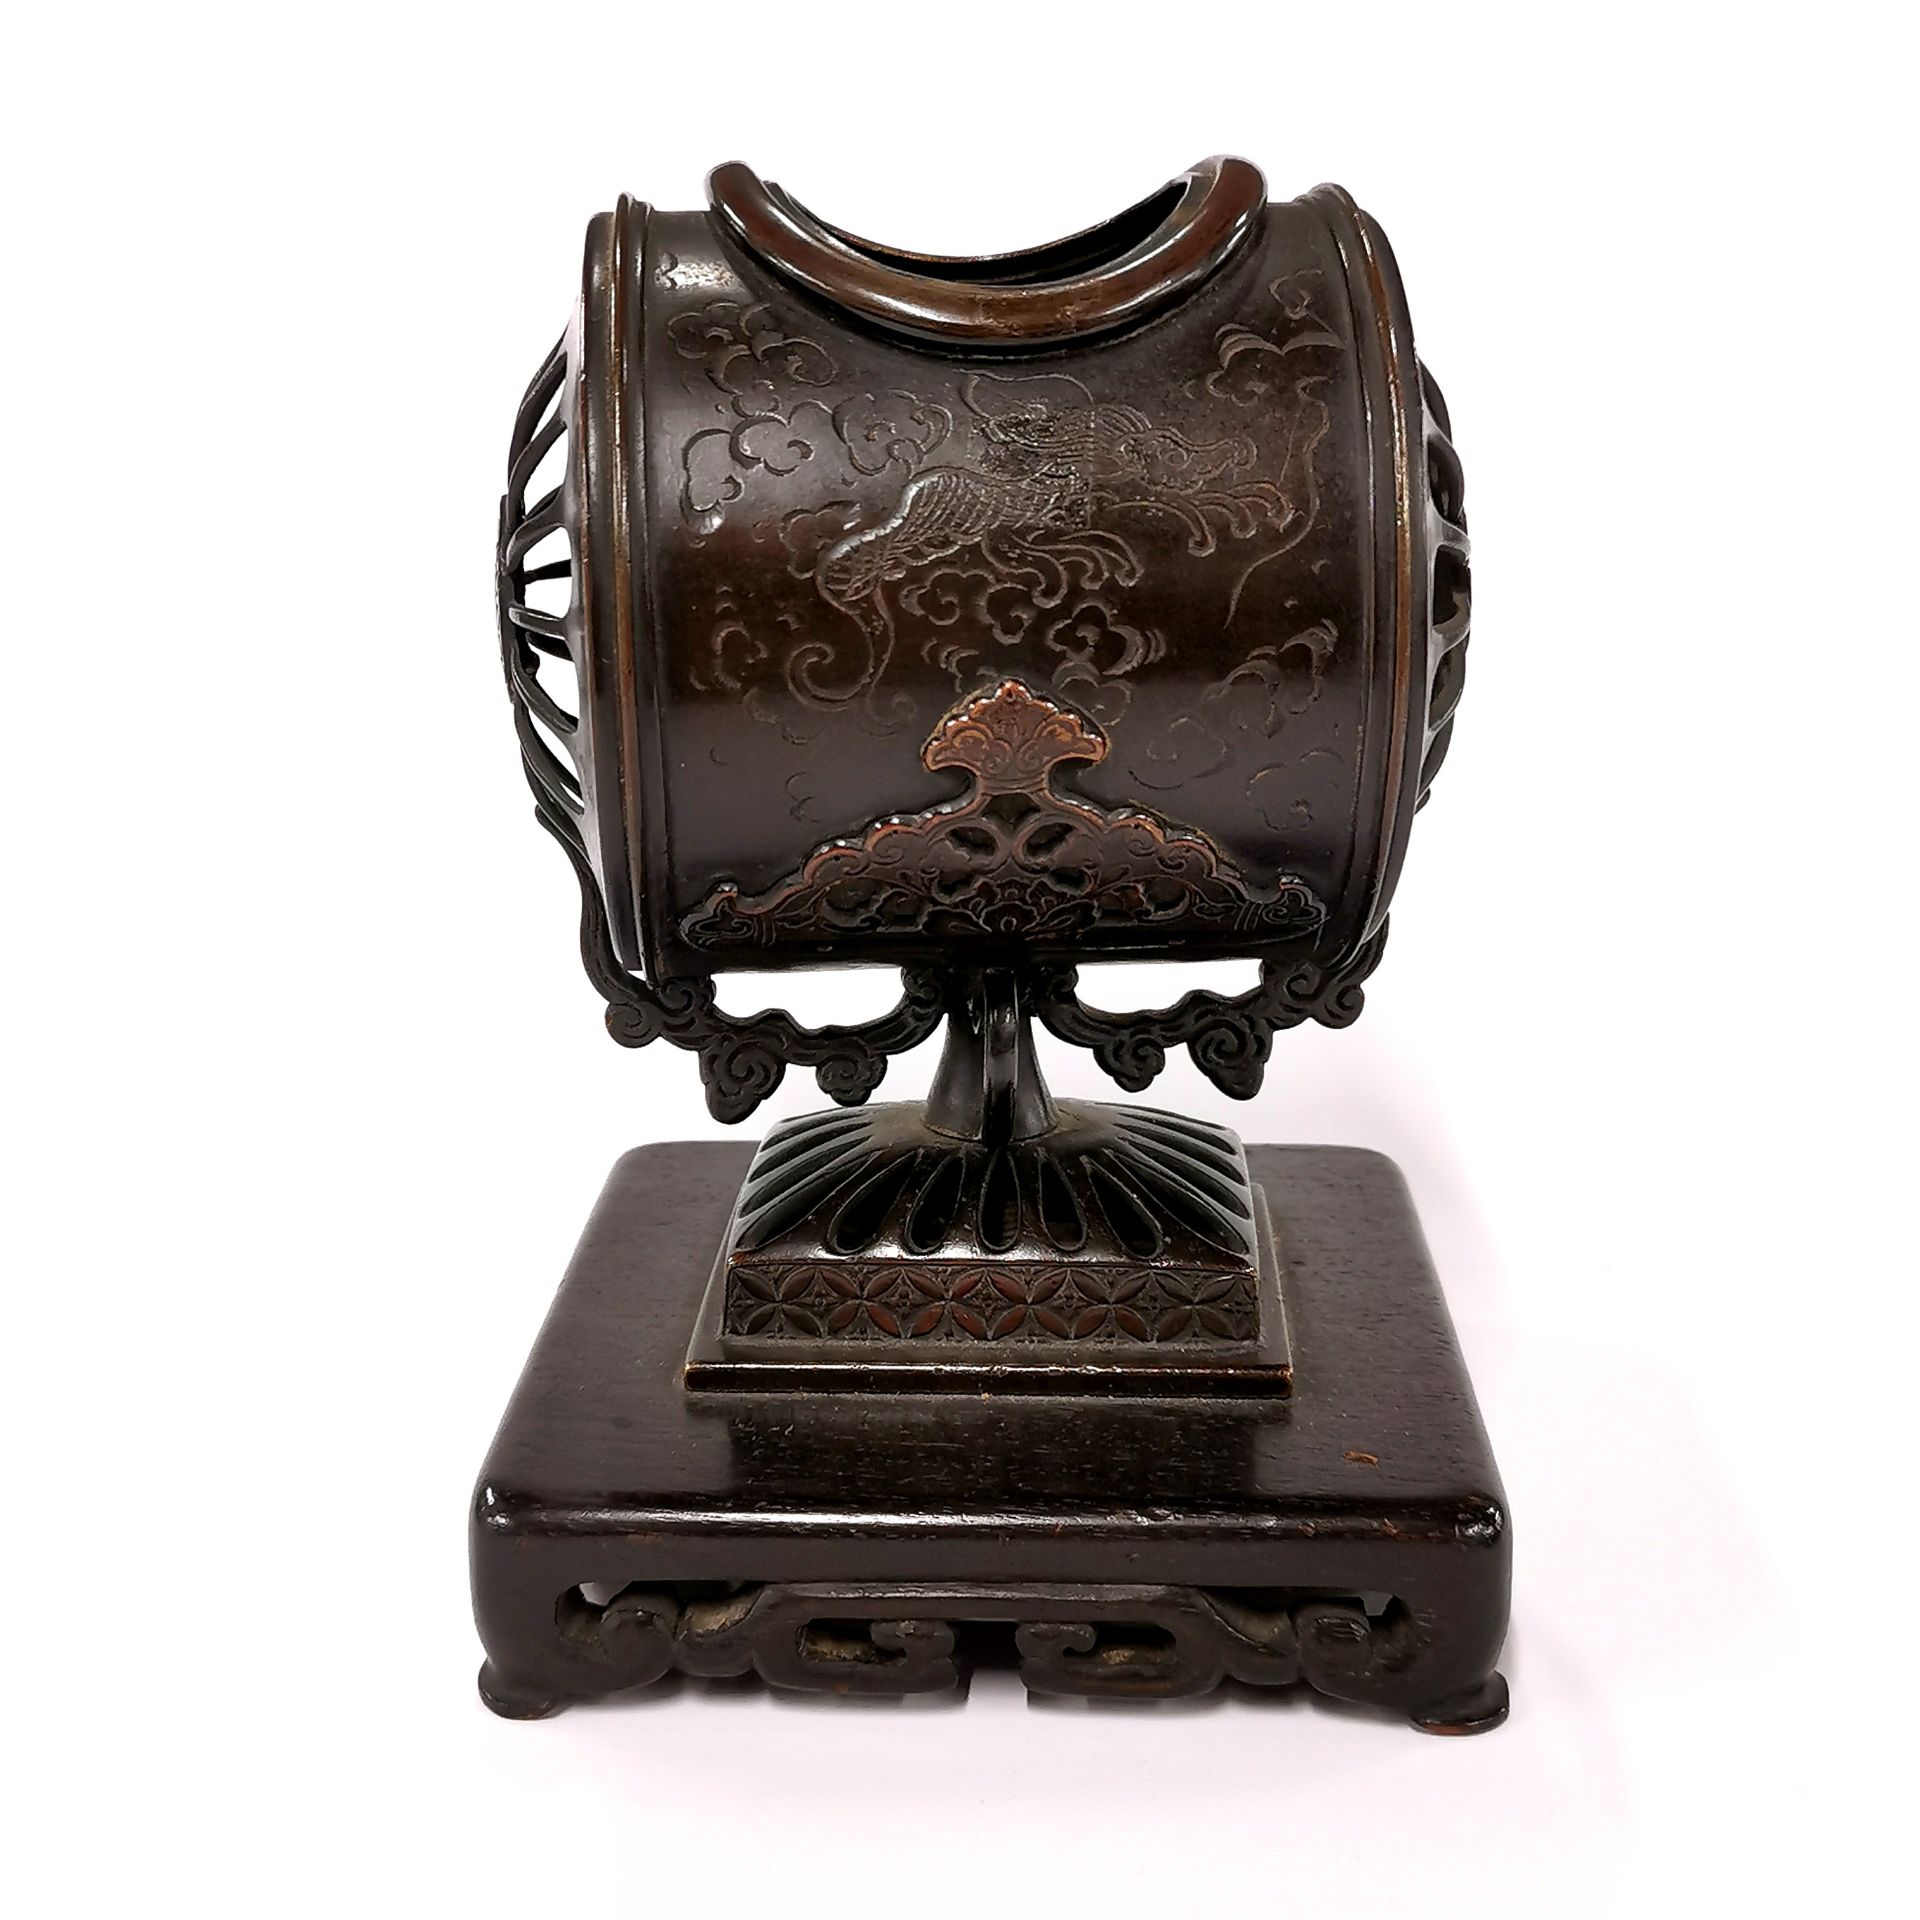 An unusual Chinese bronze censer mounted on a carved hardwood base, H. 17cm. - Image 2 of 4